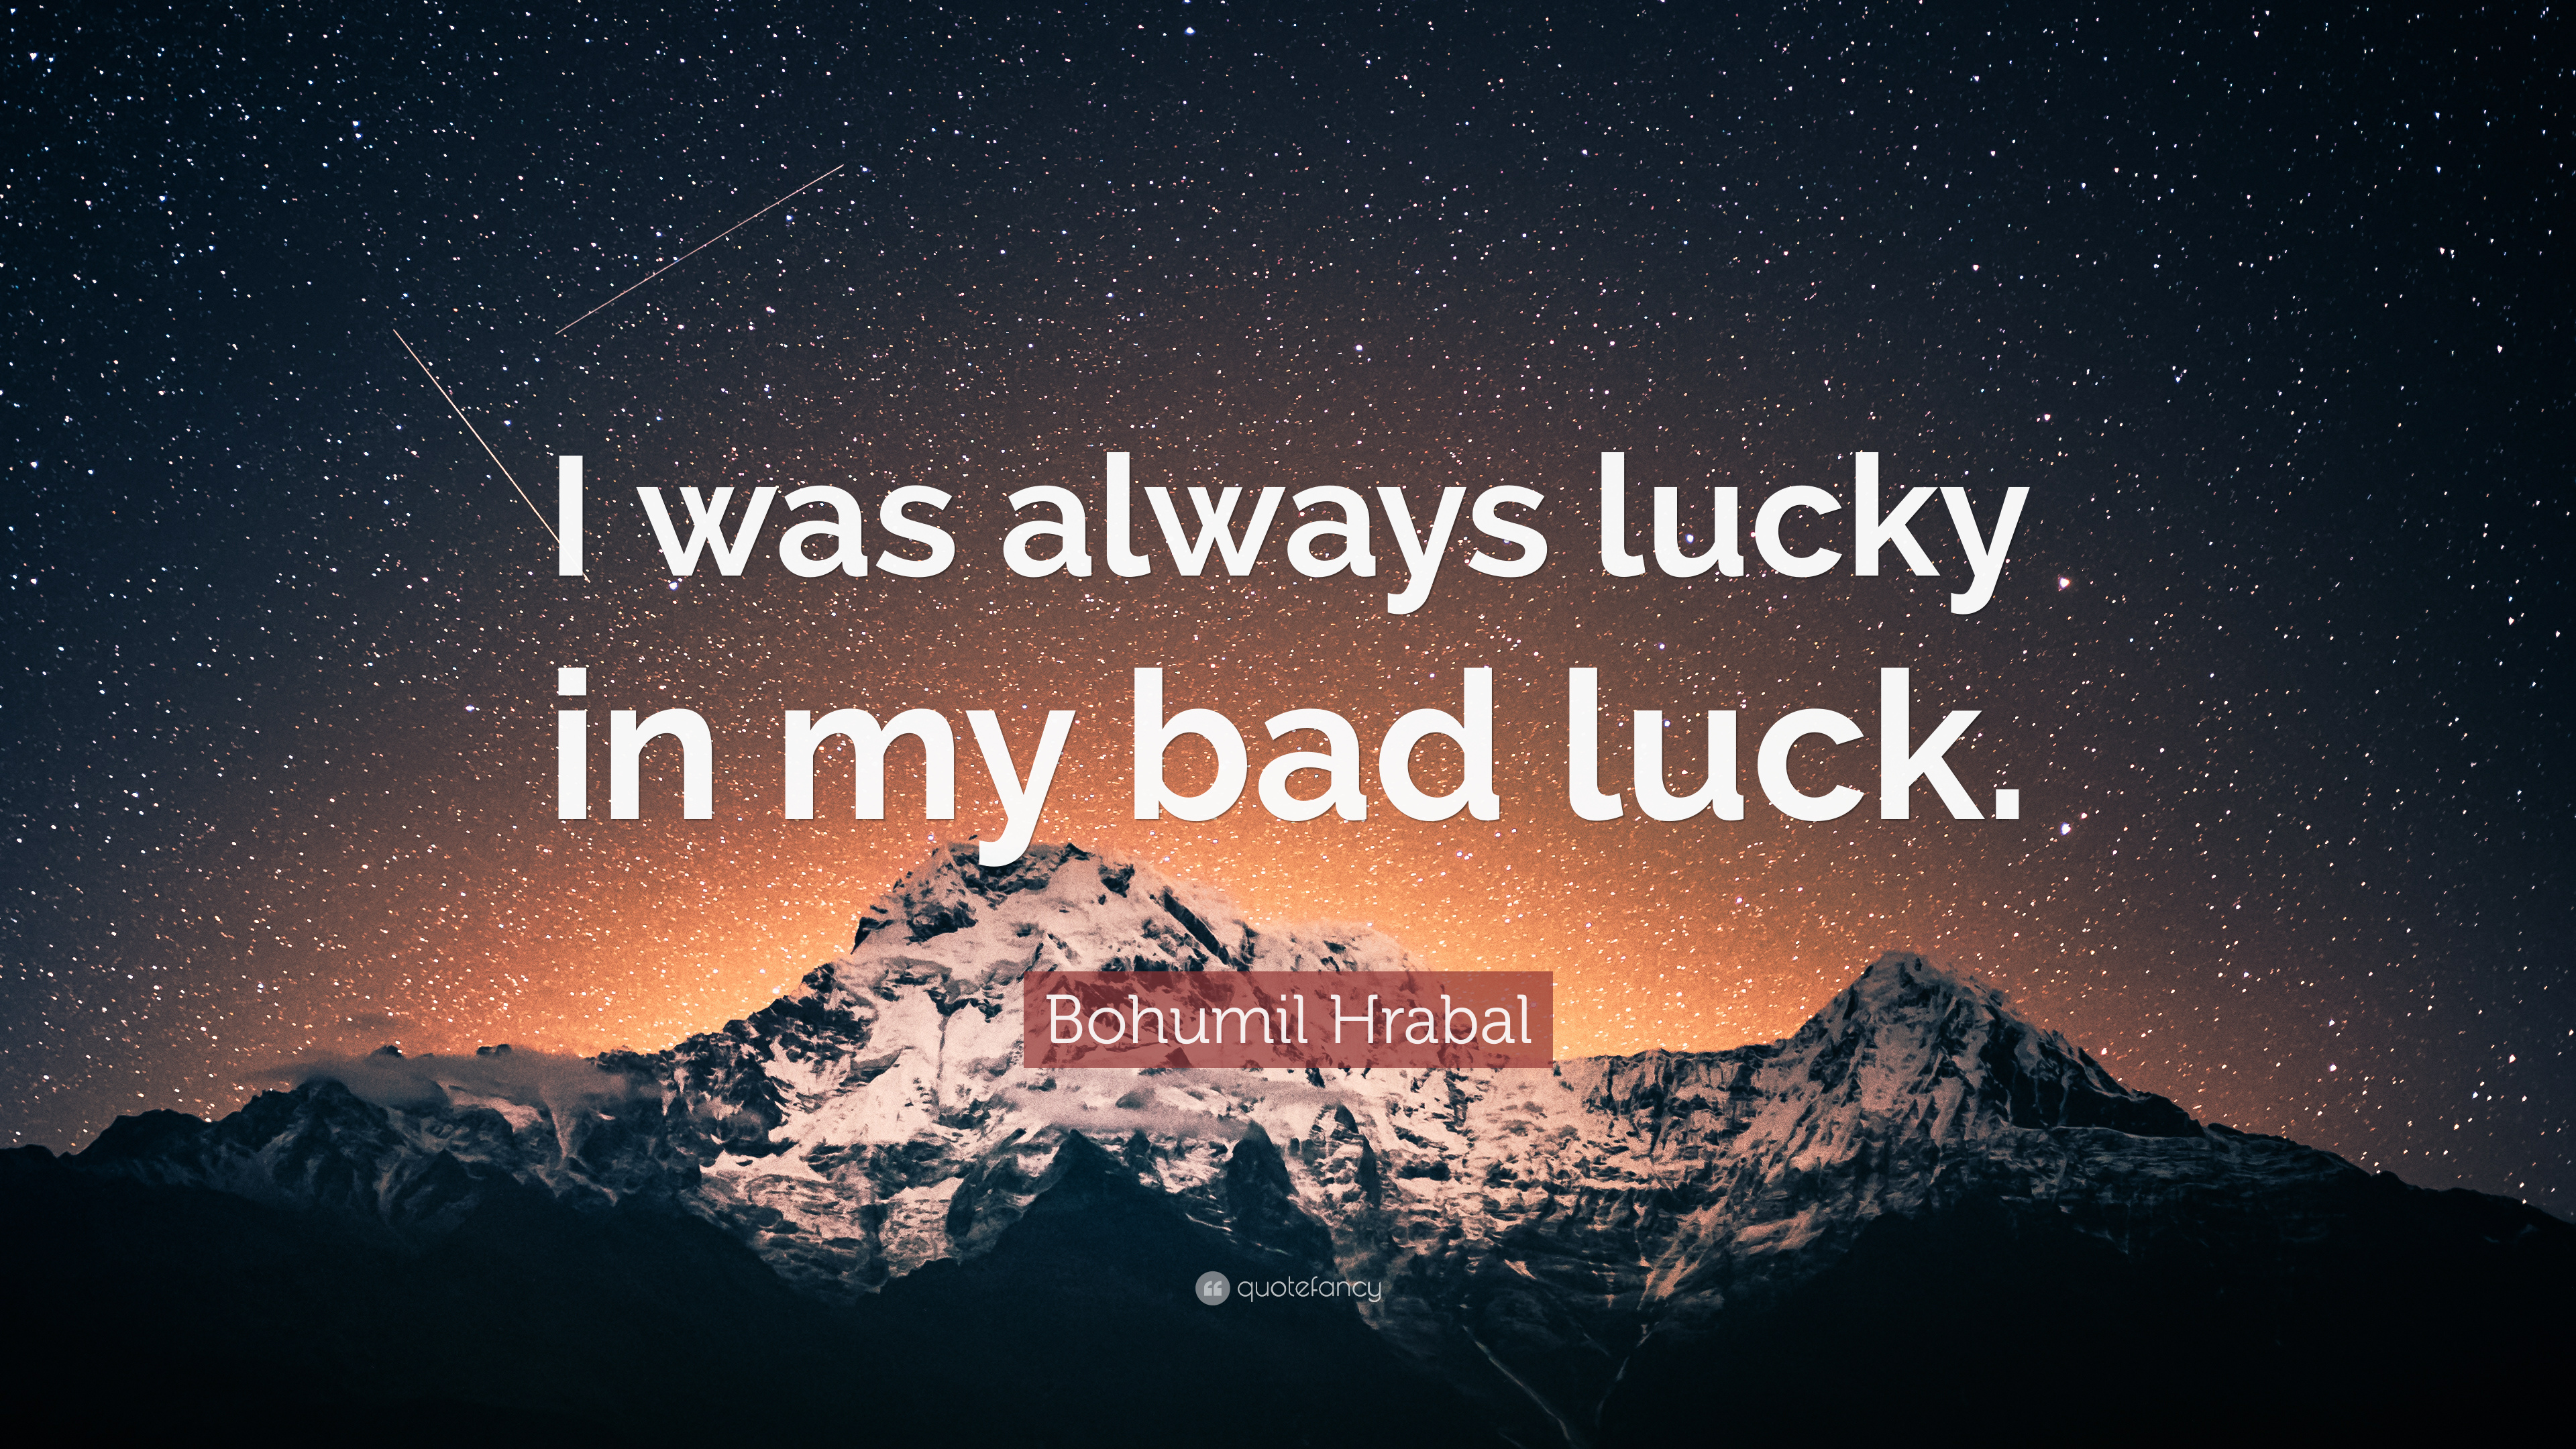 Bohumil Hrabal Quote: “I was always lucky in my bad luck.”